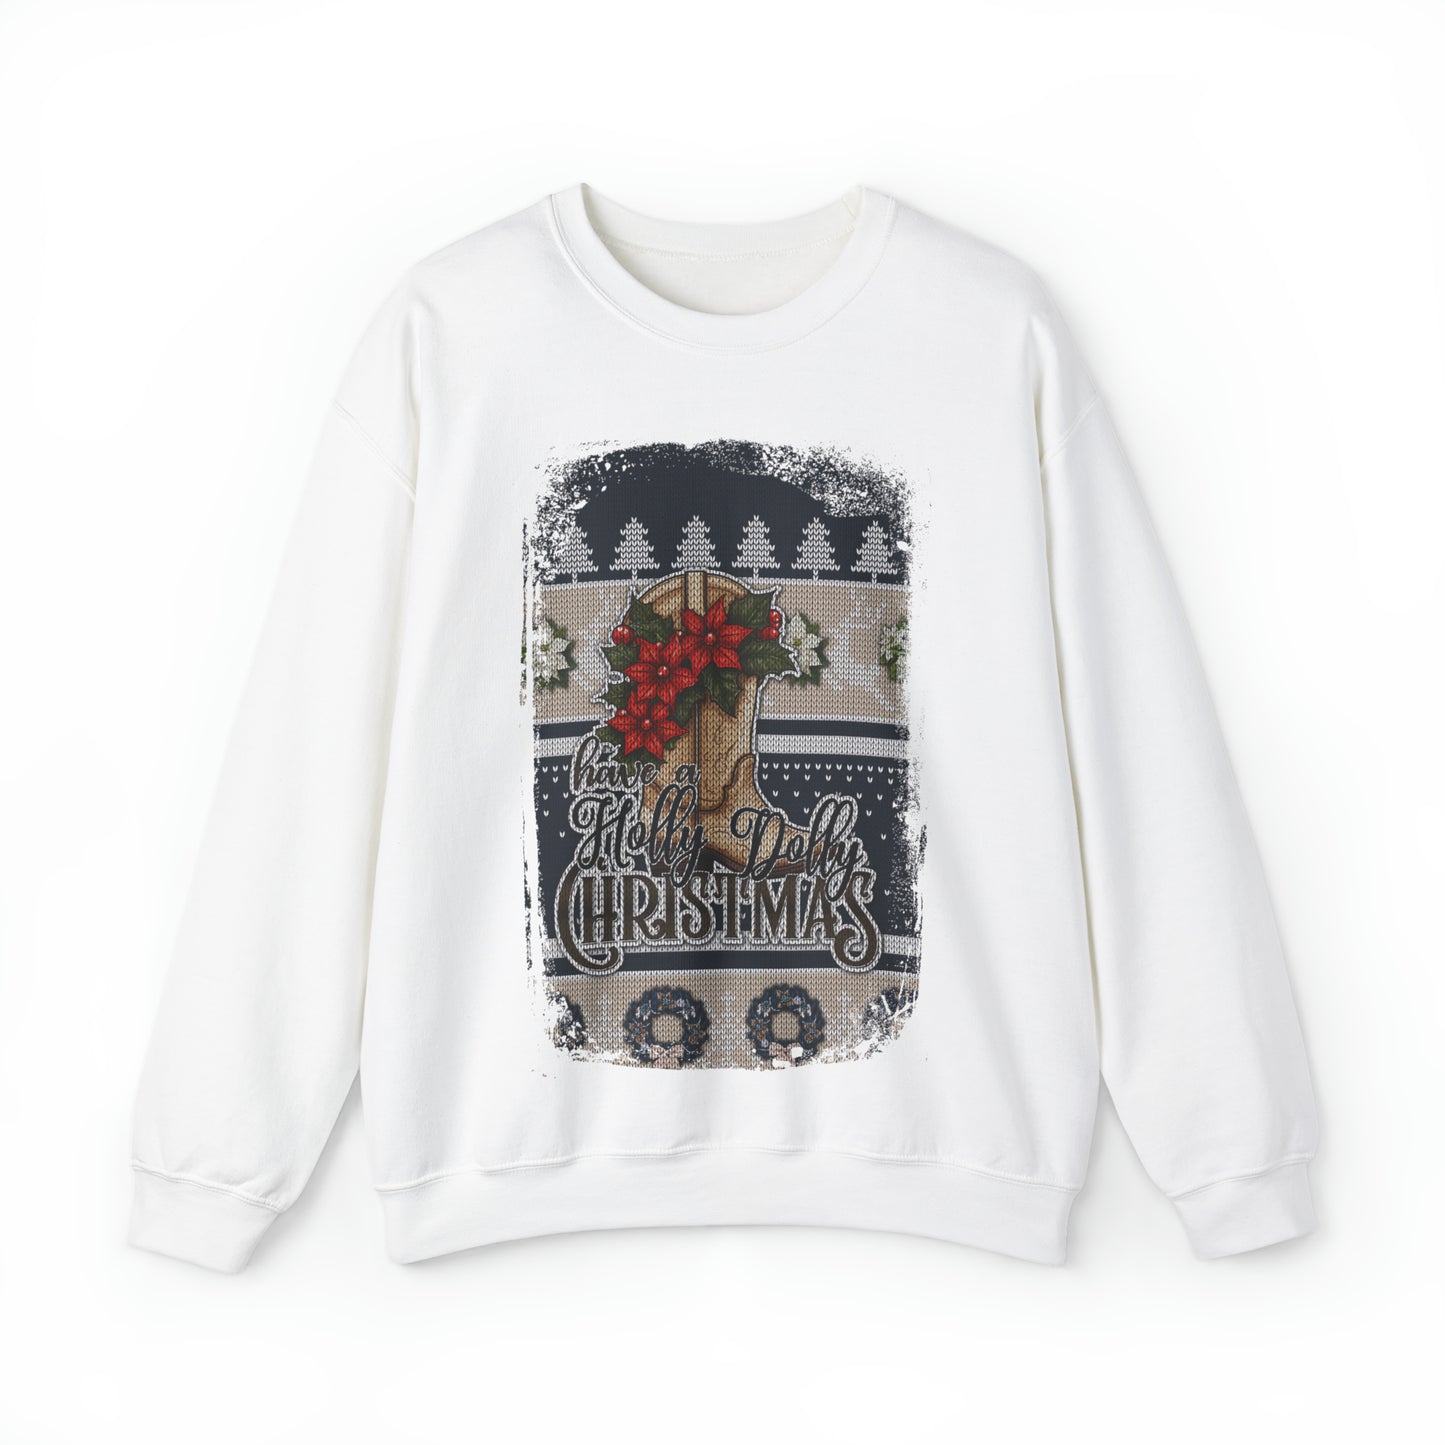 Have a Holly Dolly Christmas-Blue & Tan Ugly Christmas Sweater Sweatshirt